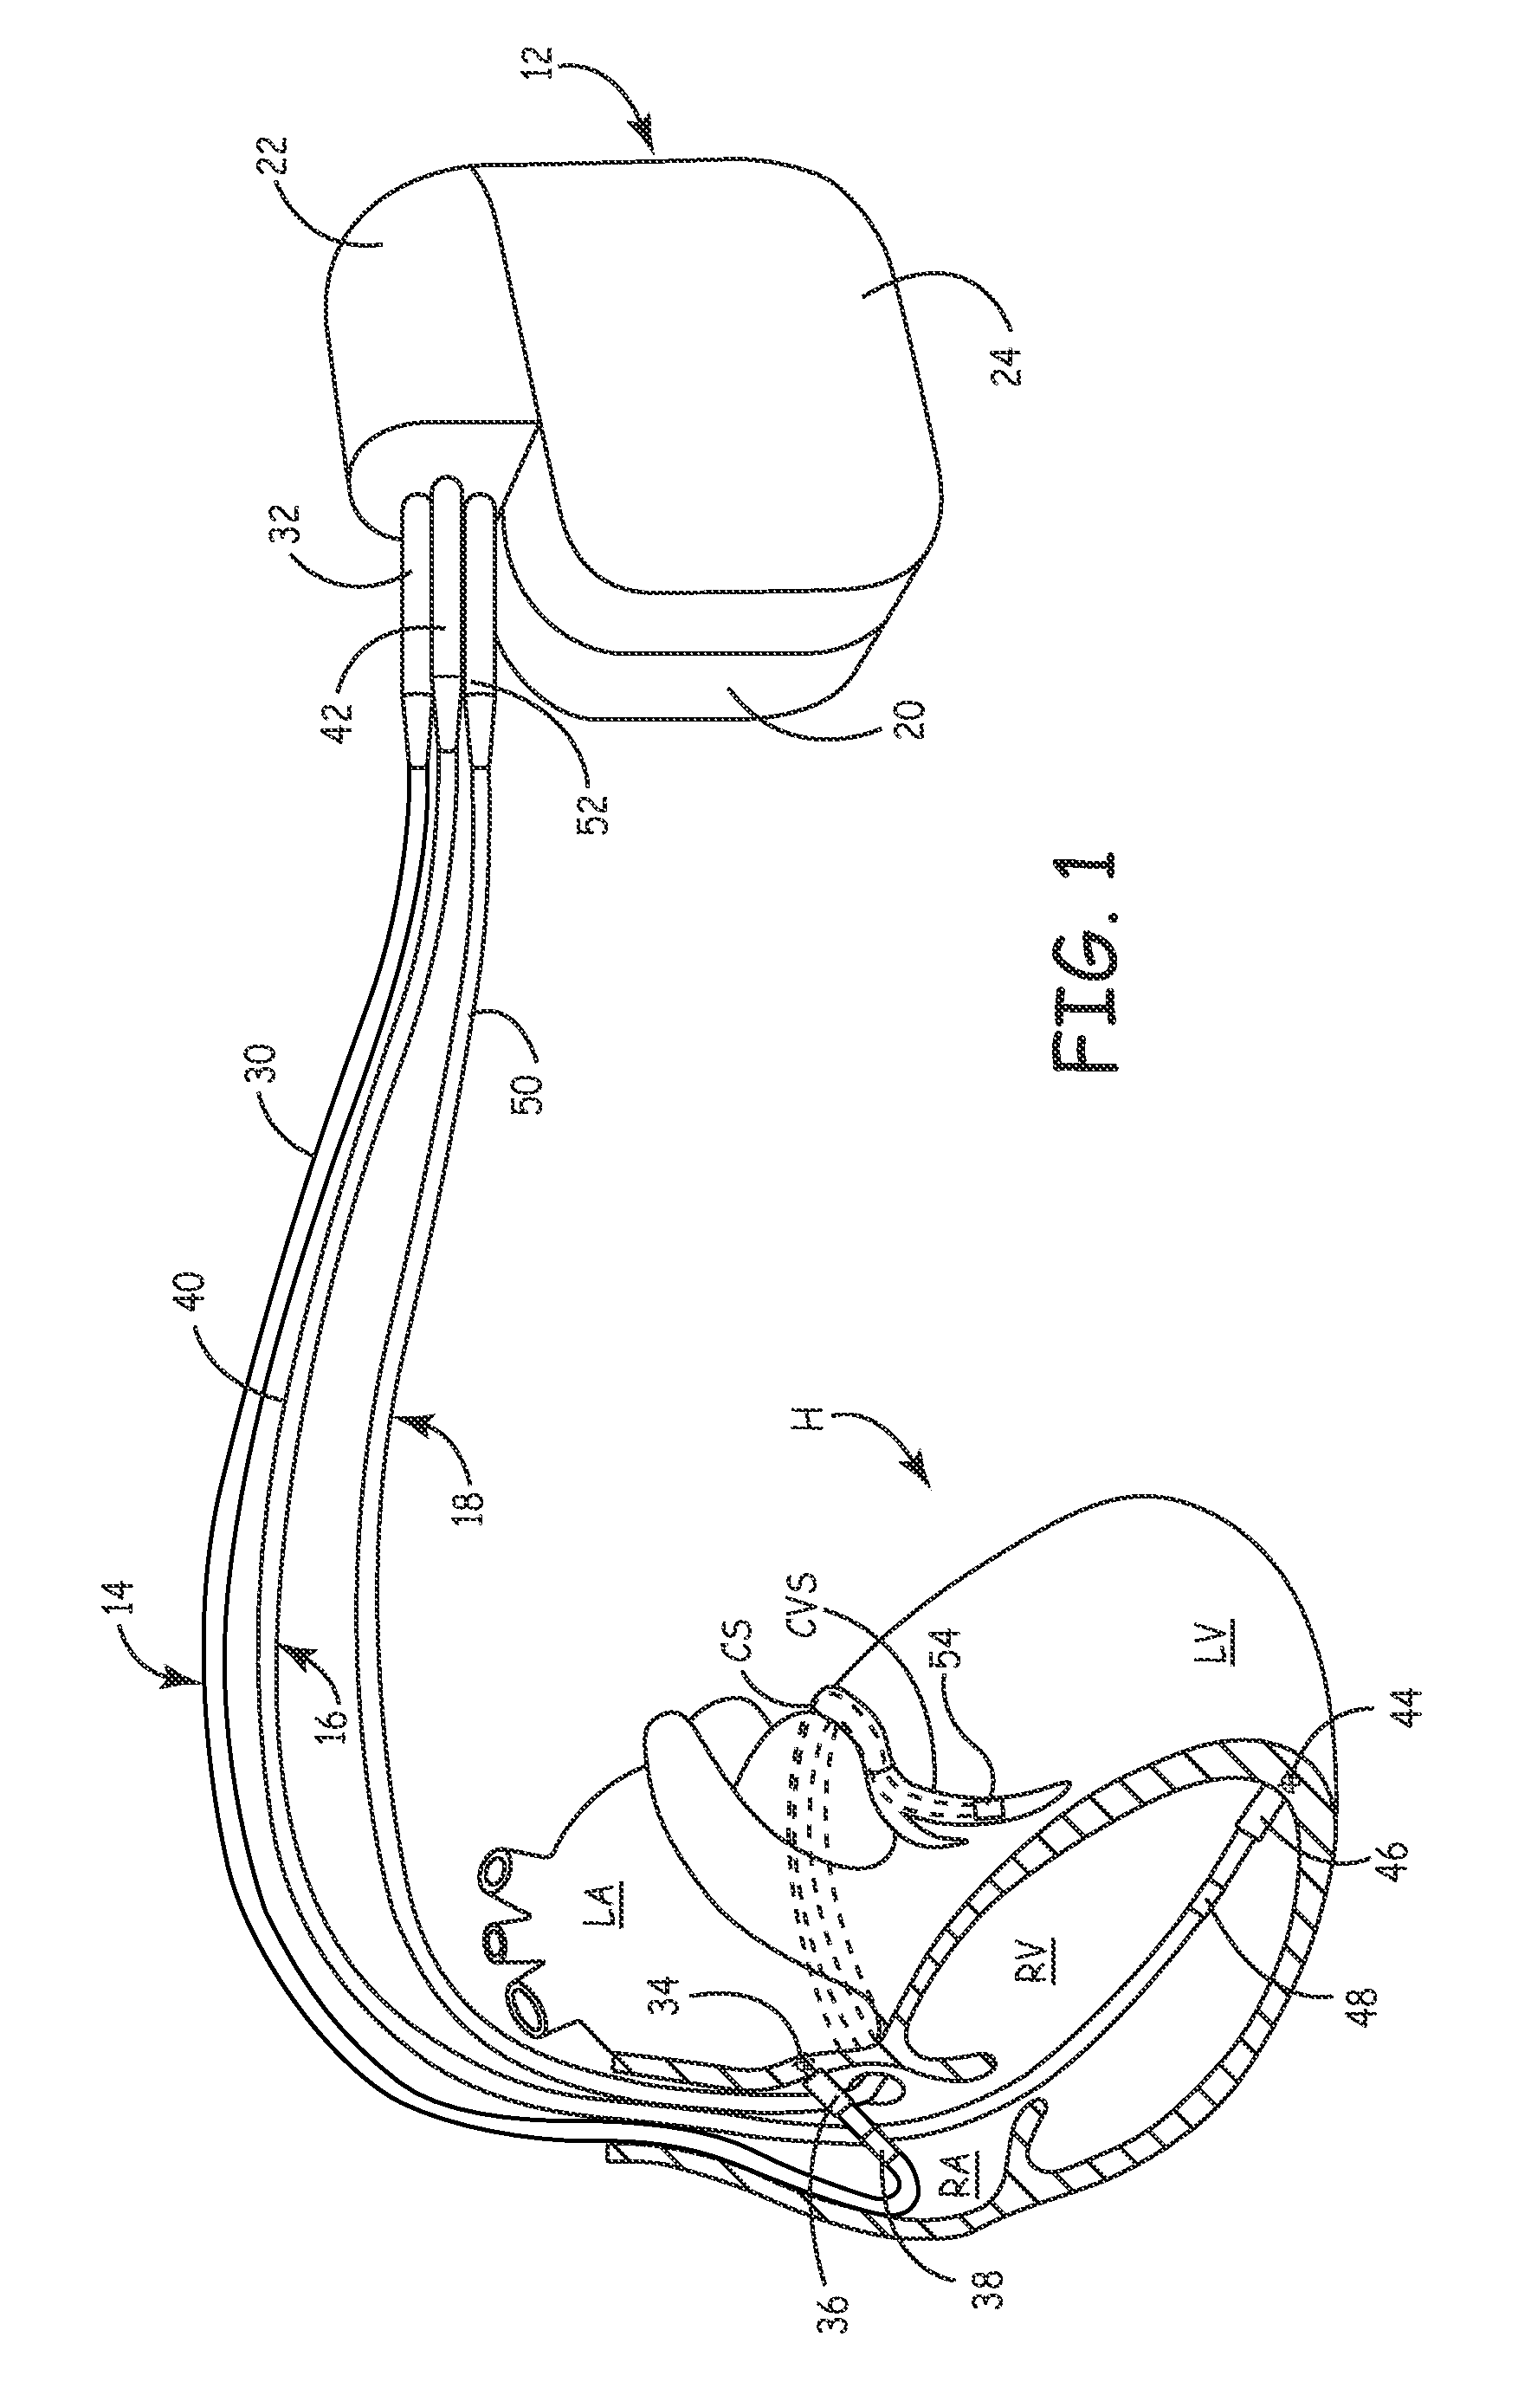 Method and apparatus for detecting left ventricular lead displacement based upon EGM change